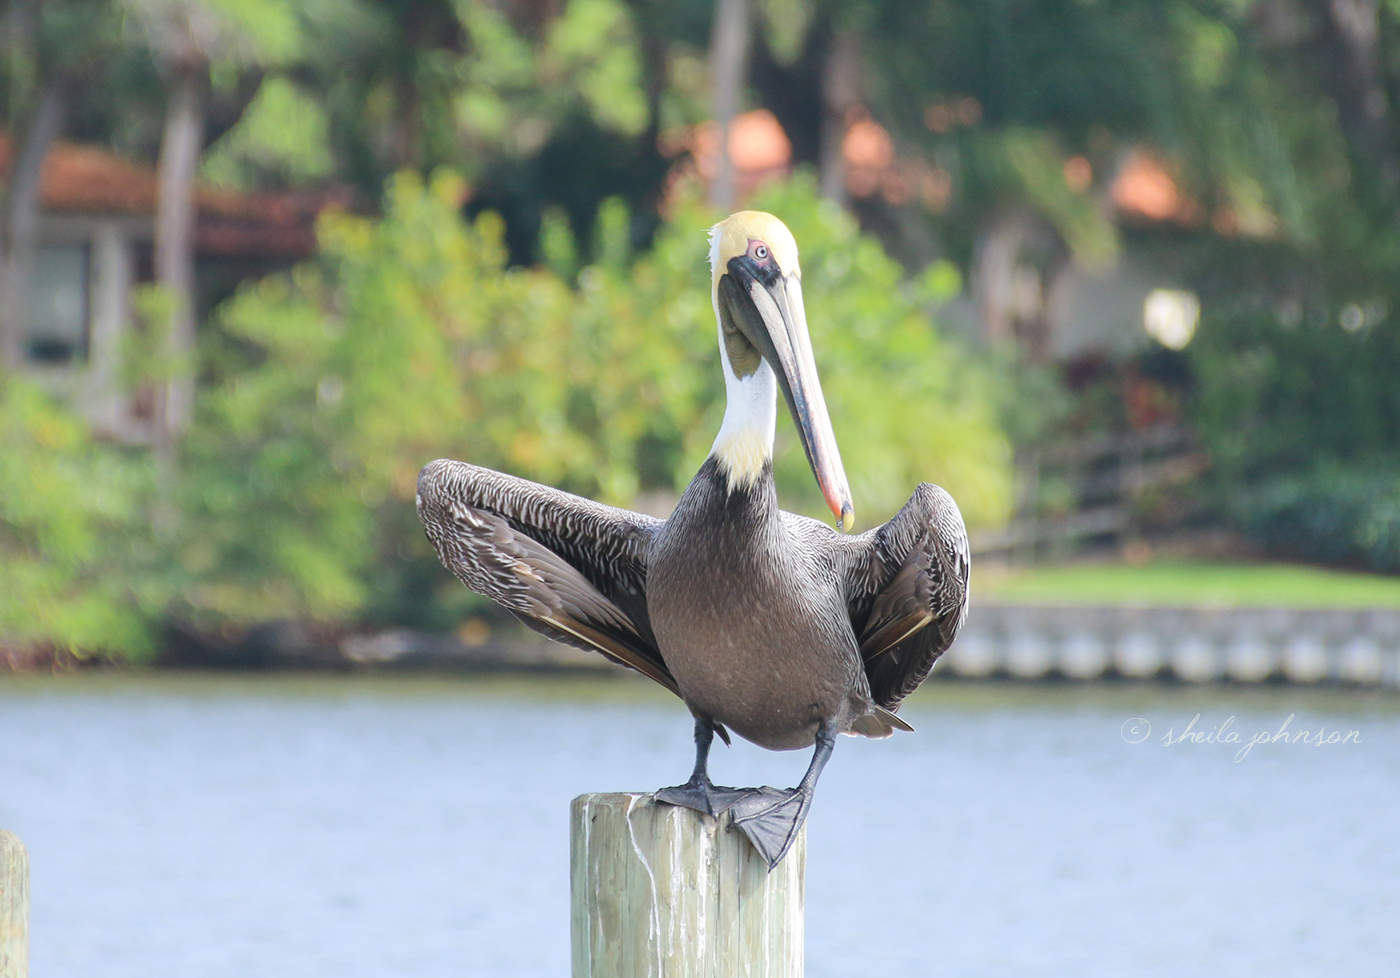 This Poor Pelican Is Struggling To Stay On The Piling. If Only He&#039;D Move A Tiny Bit To The Side, He&#039;D Fit Perfectly. Silly, Bird!